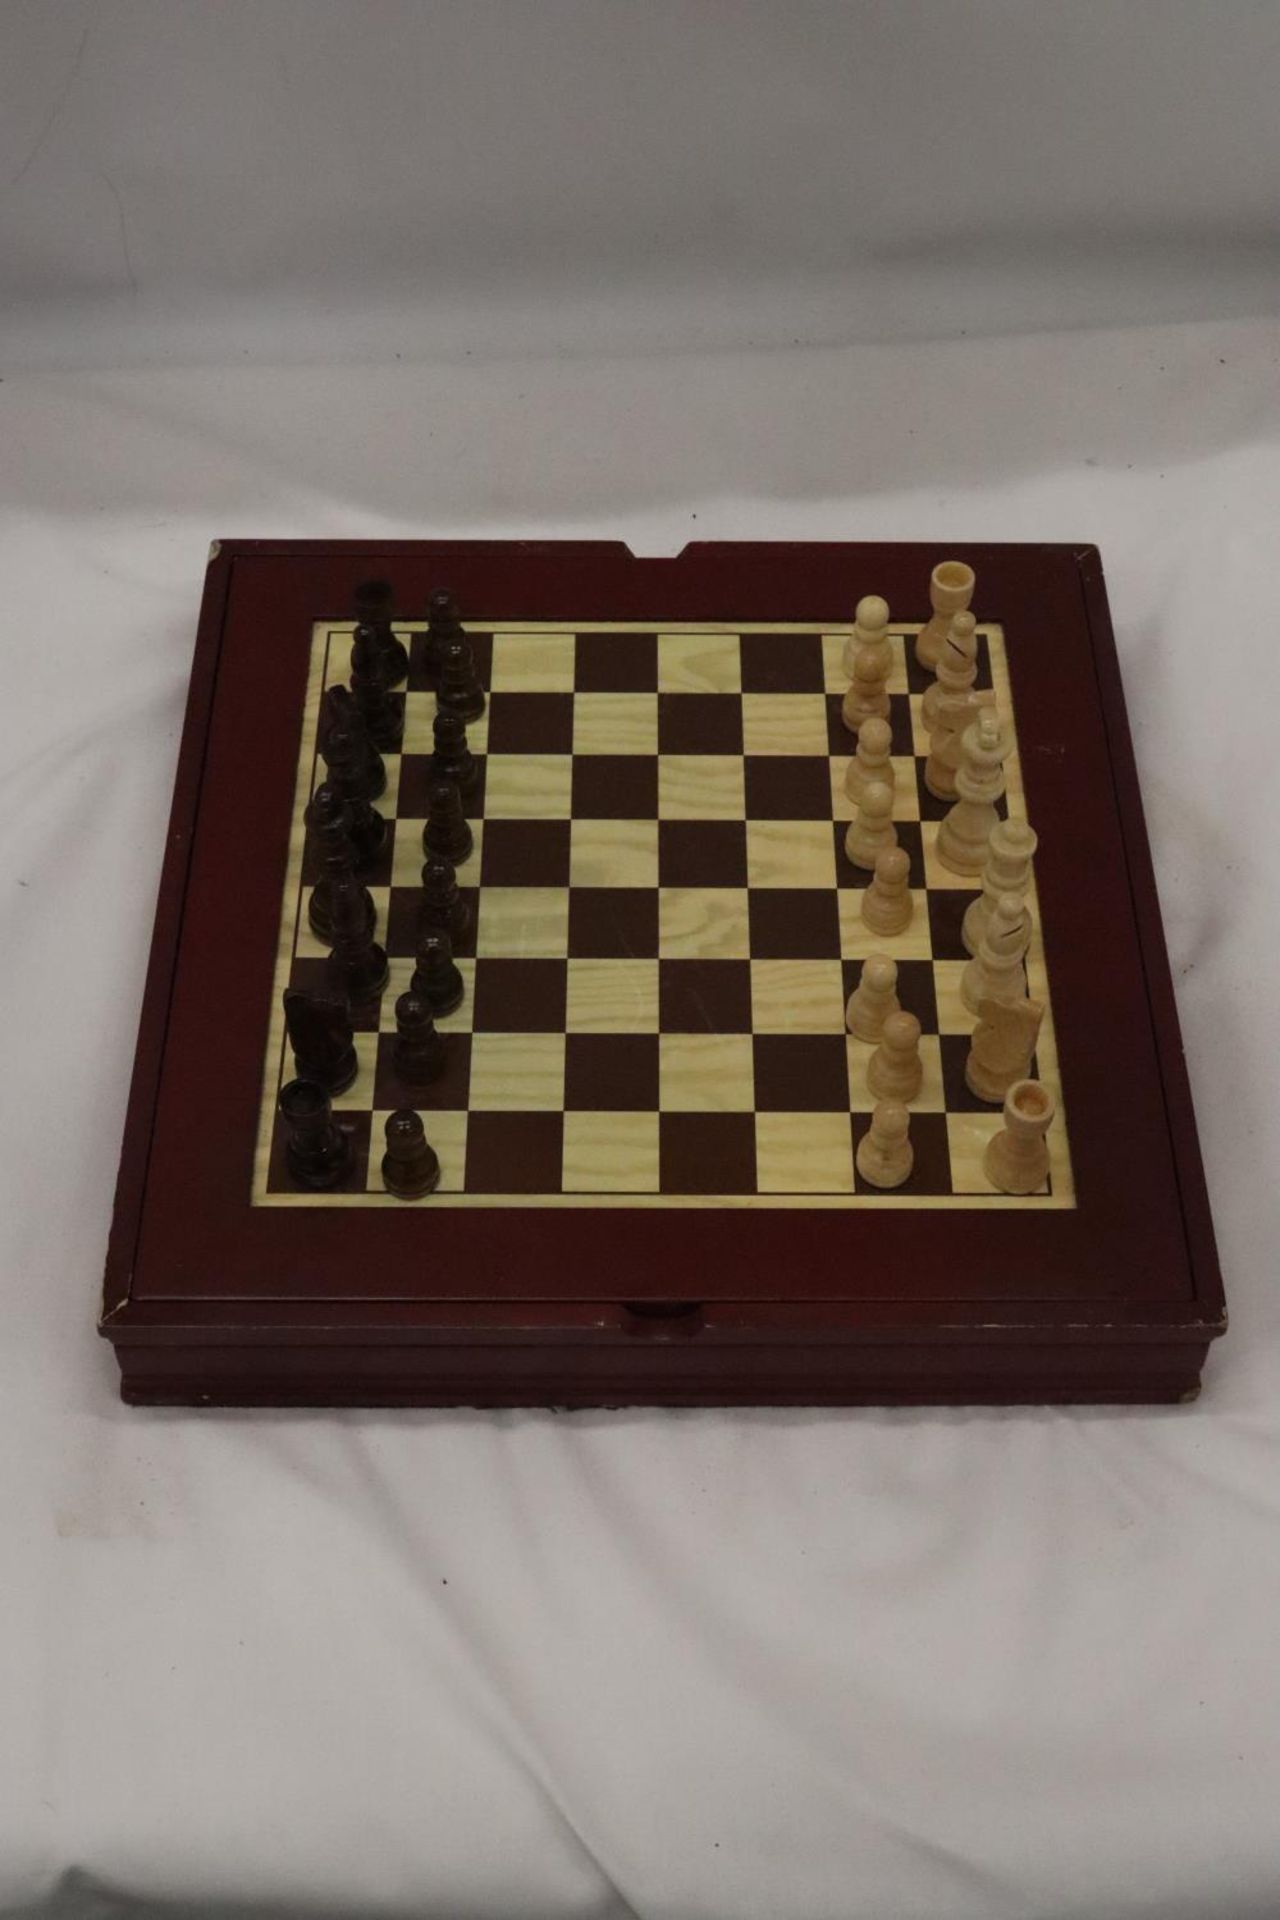 A 7 IN 1 COMPENDIUM SET TO INCLUDE CHESS, DRAUGHTS, BACKGAMMON, ETC